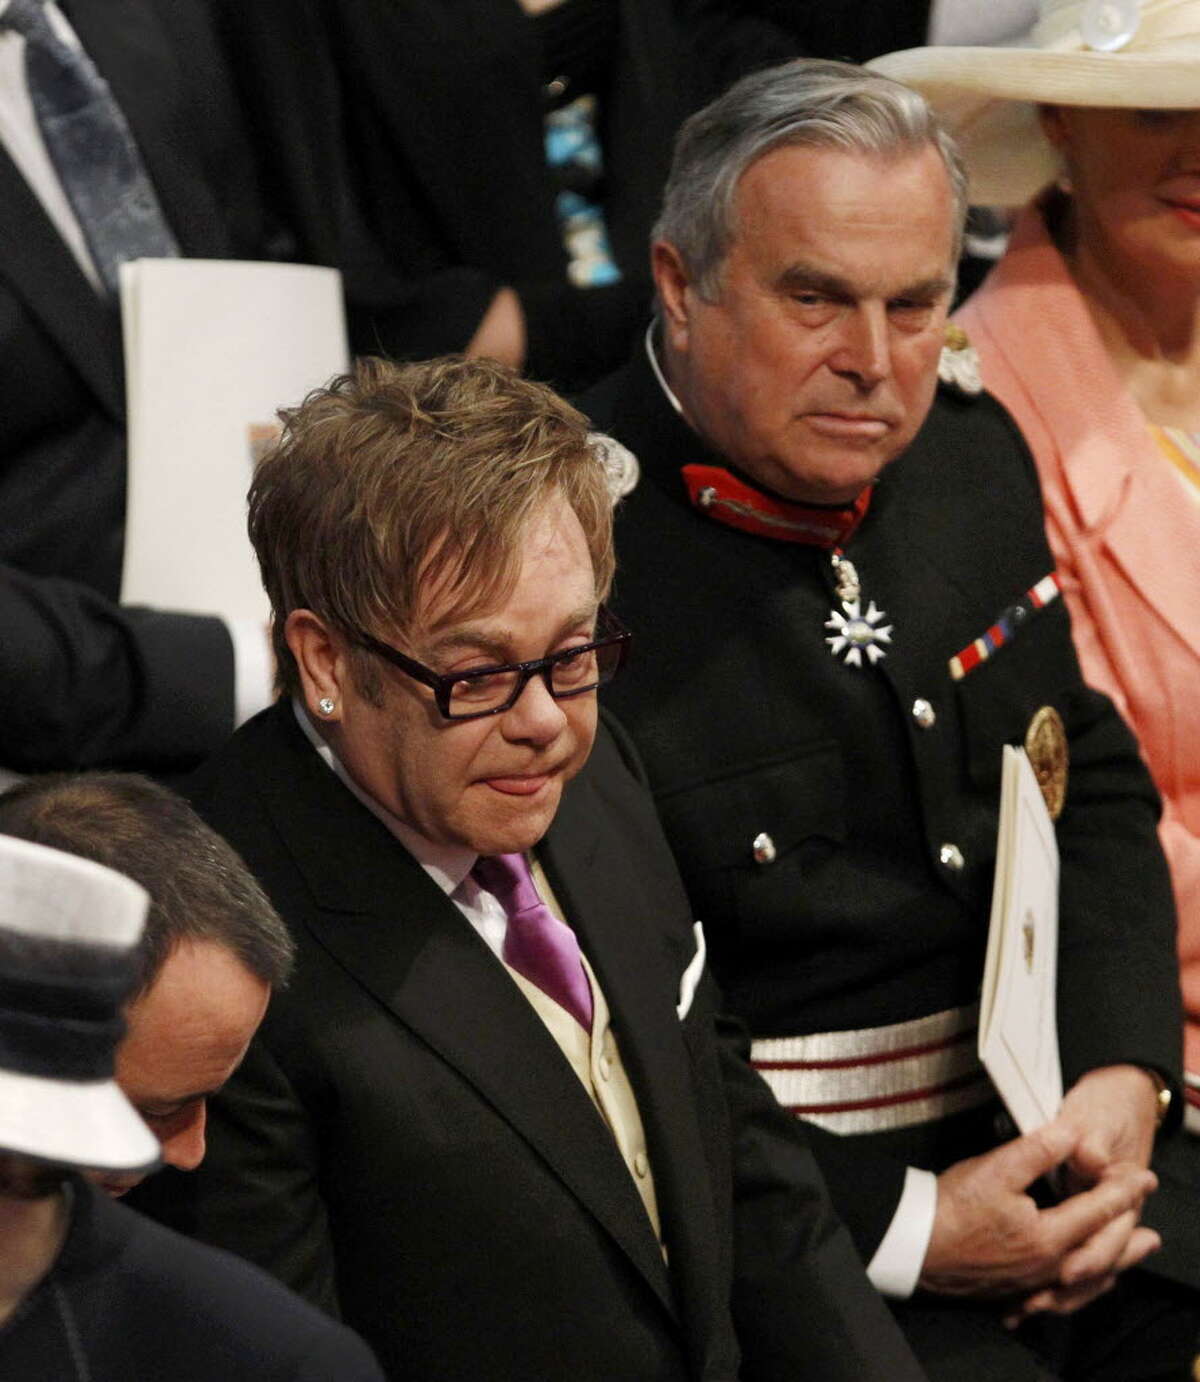 LONDON, ENGLAND - APRIL 29: Sir Elton John arrives at Westminster Abbey ahead of the Royal Wedding of Prince William to Catherine Middleton at Westminster Abbey on April 29, 2011 in London, England. The marriage of the second in line to the British throne is to be led by the Archbishop of Canterbury and will be attended by 1900 guests, including foreign Royal family members and heads of state. Thousands of well-wishers from around the world have also flocked to London to witness the spectacle and pageantry of the Royal Wedding. (Photo by Suzanne Plunkett - WPA Pool/Getty Images)